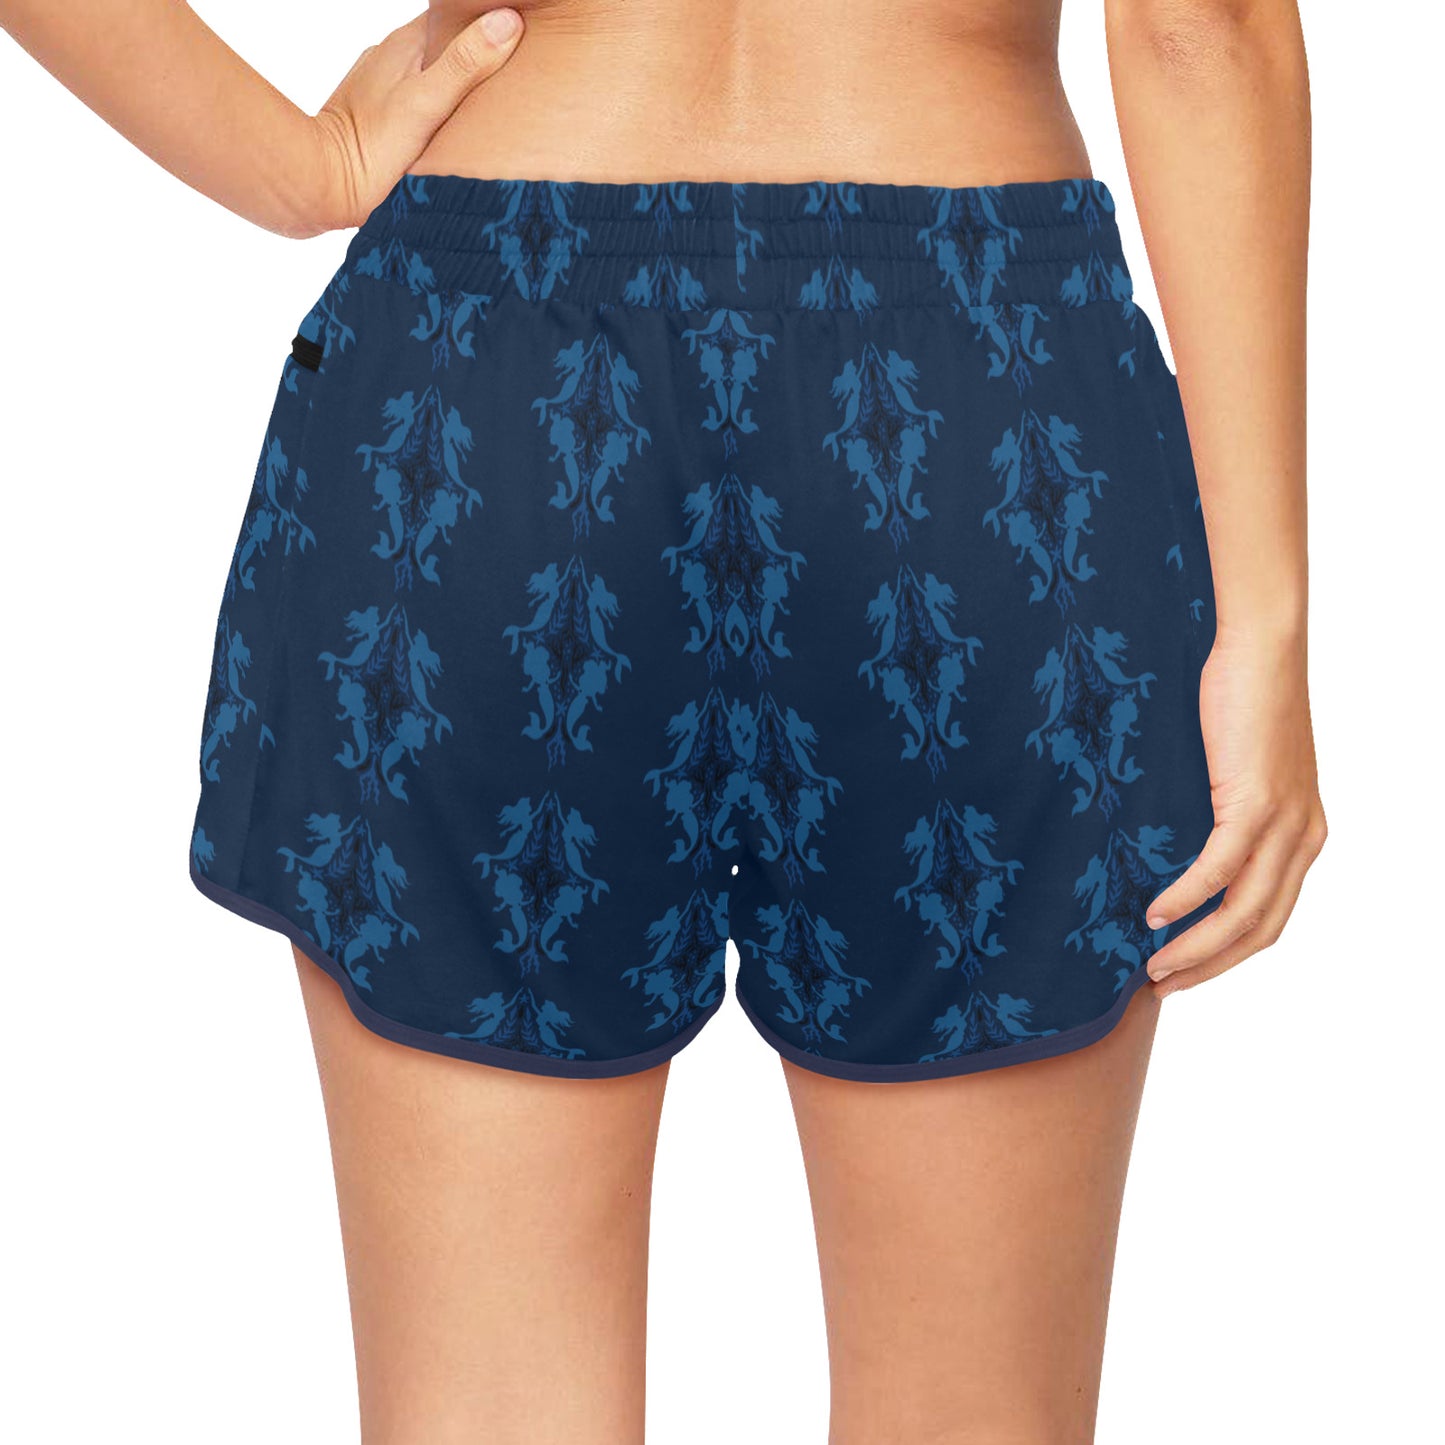 Under The Sea Women's Athletic Sports Shorts